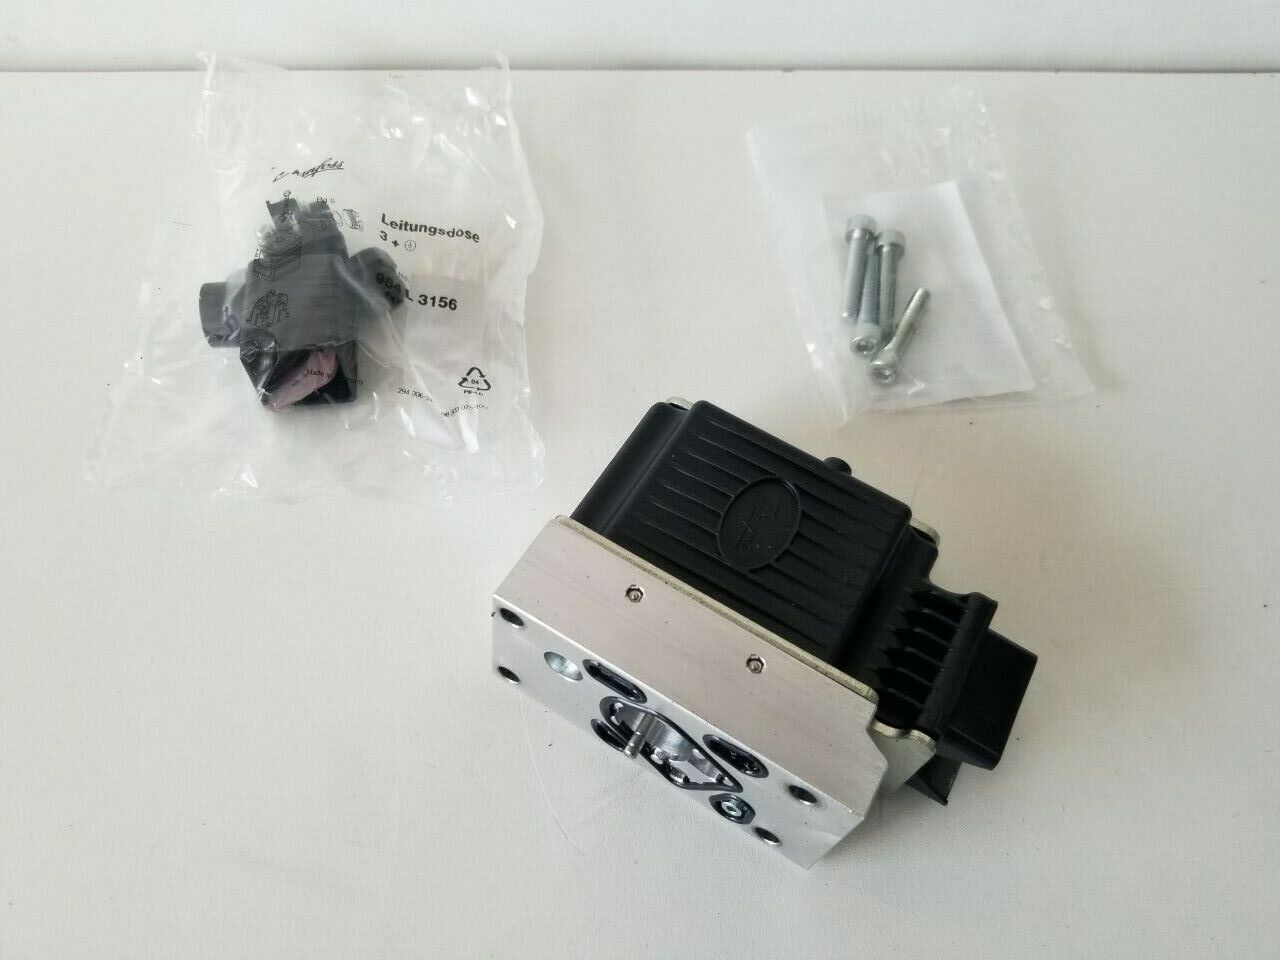 SU 11166824 Danfoss Proportional Coil PVEH 32 (S4) 11-32 Volt DC. with Passive  Fault Monitoring. Replaces Old Part Number 157B4並行輸入 【信頼】